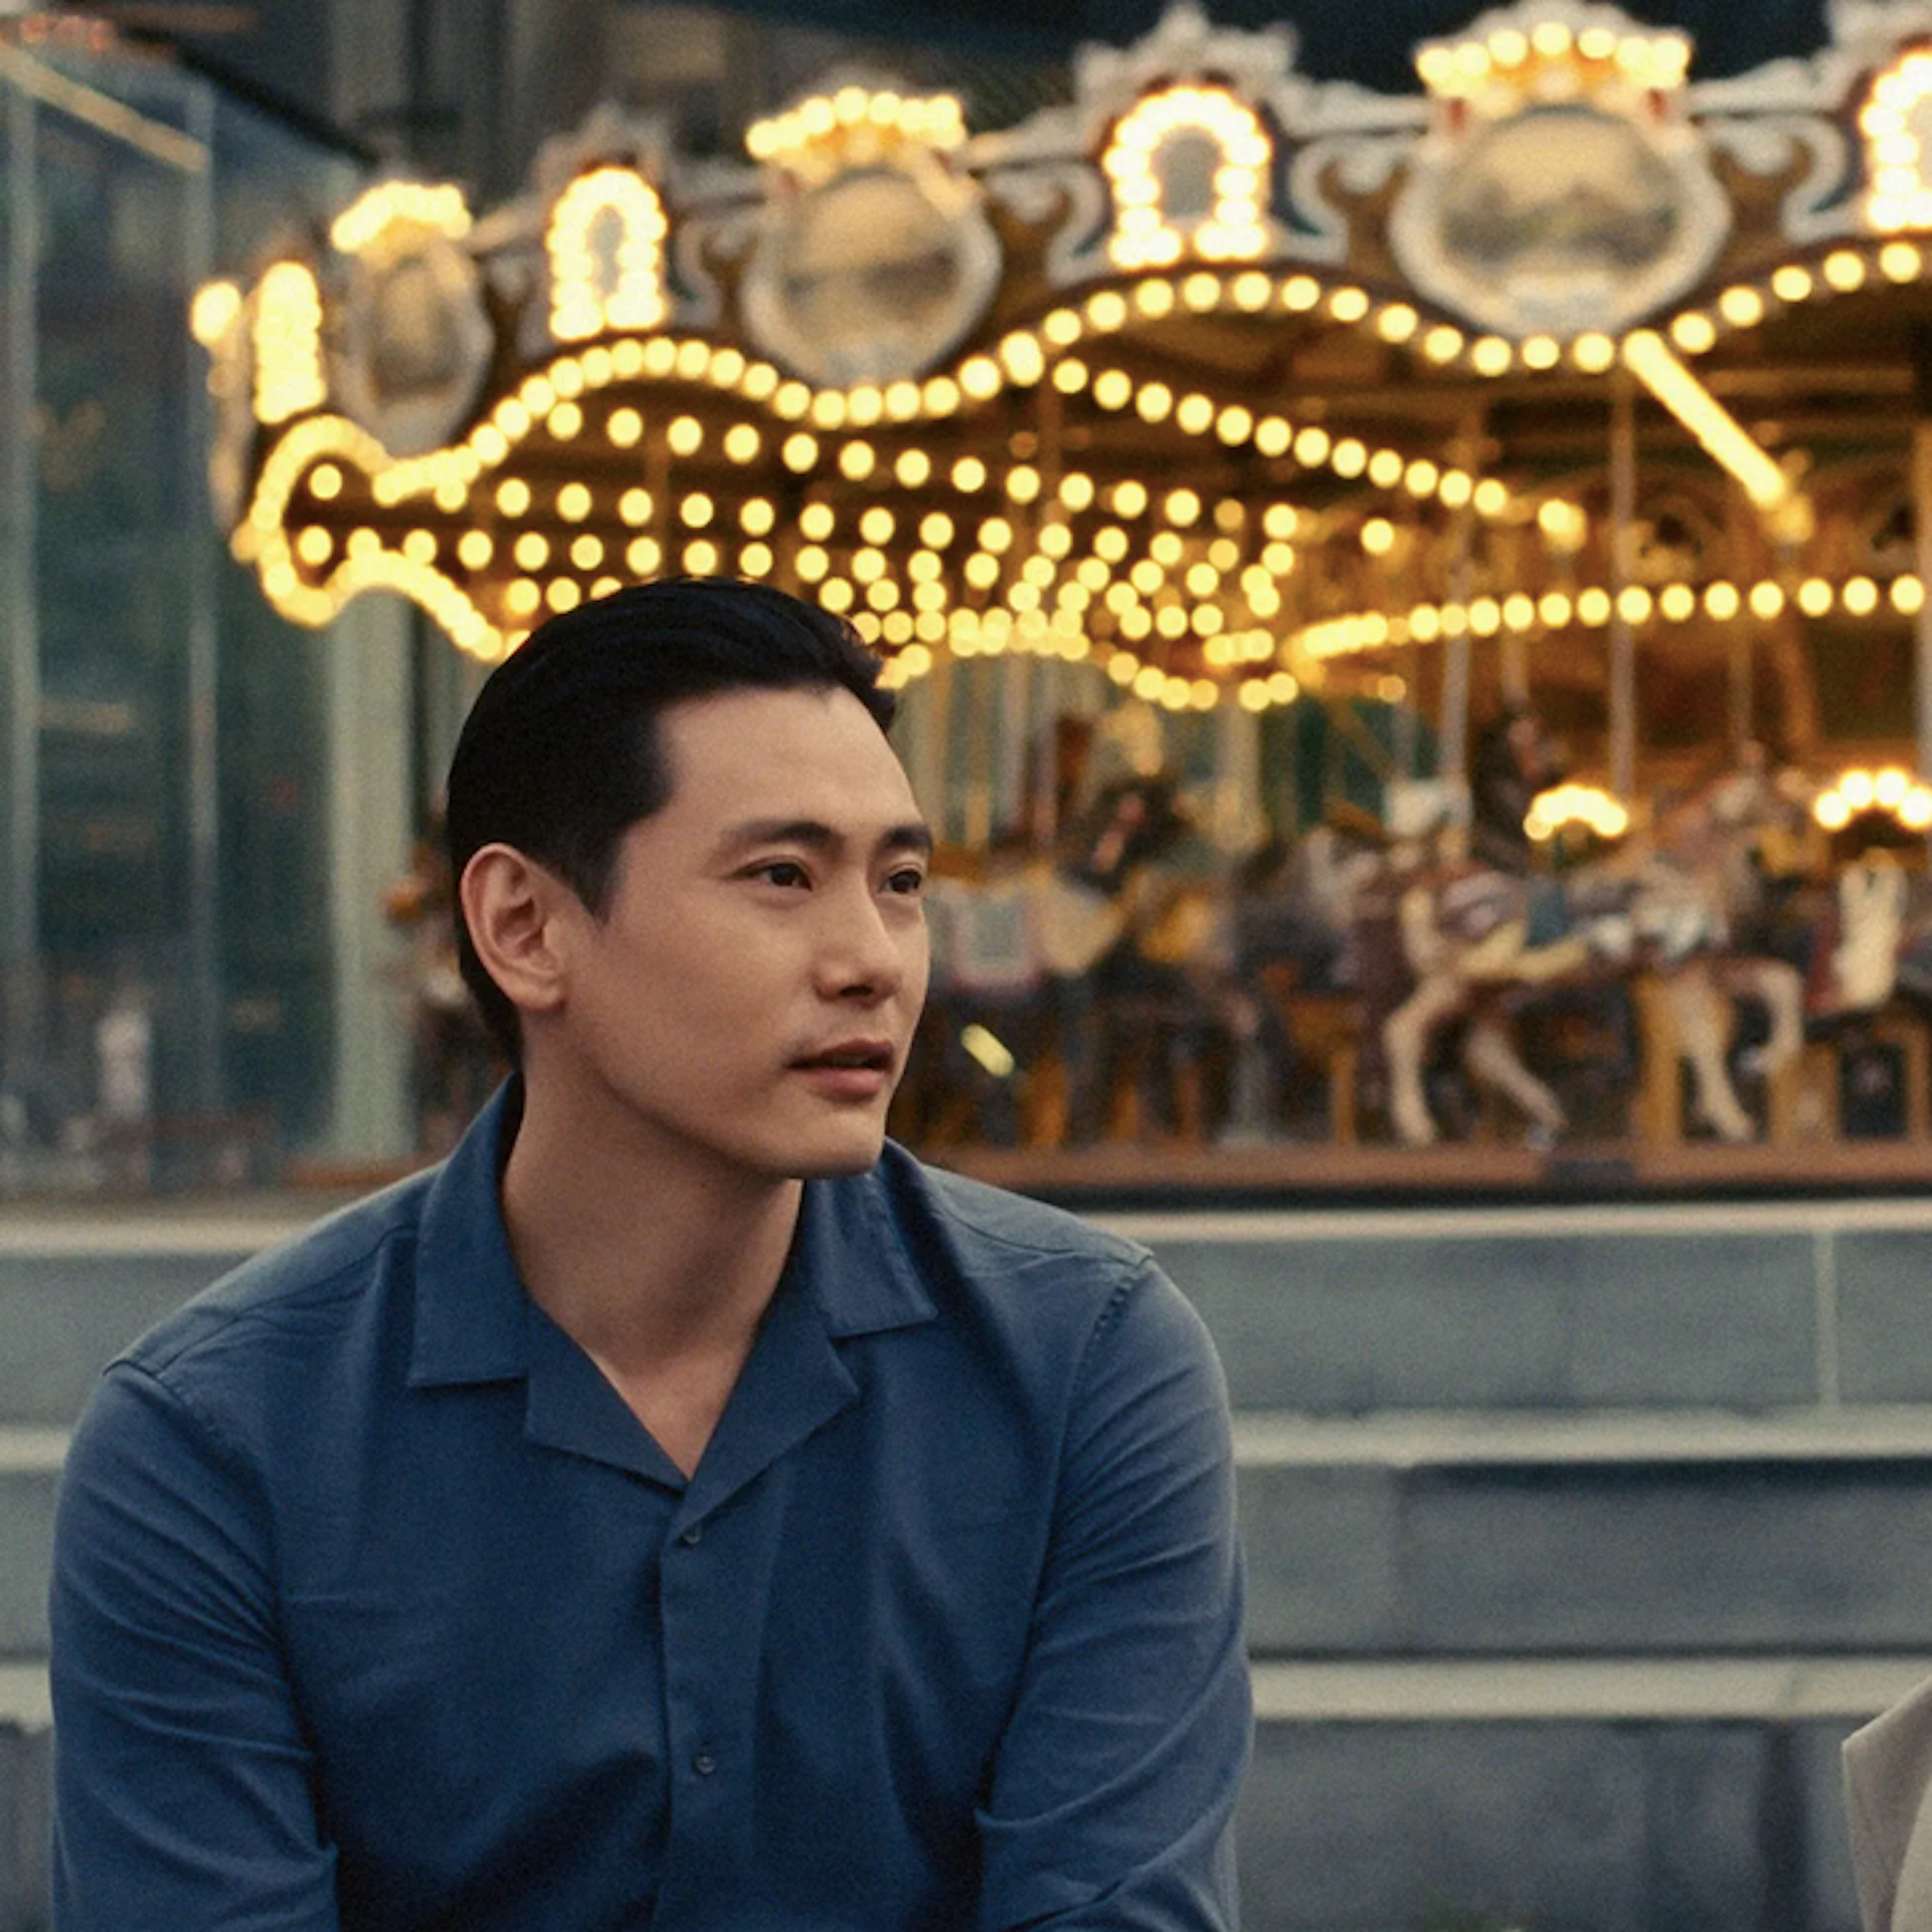 Young Korean man sits near a young Korean woman with a carousel in the background.